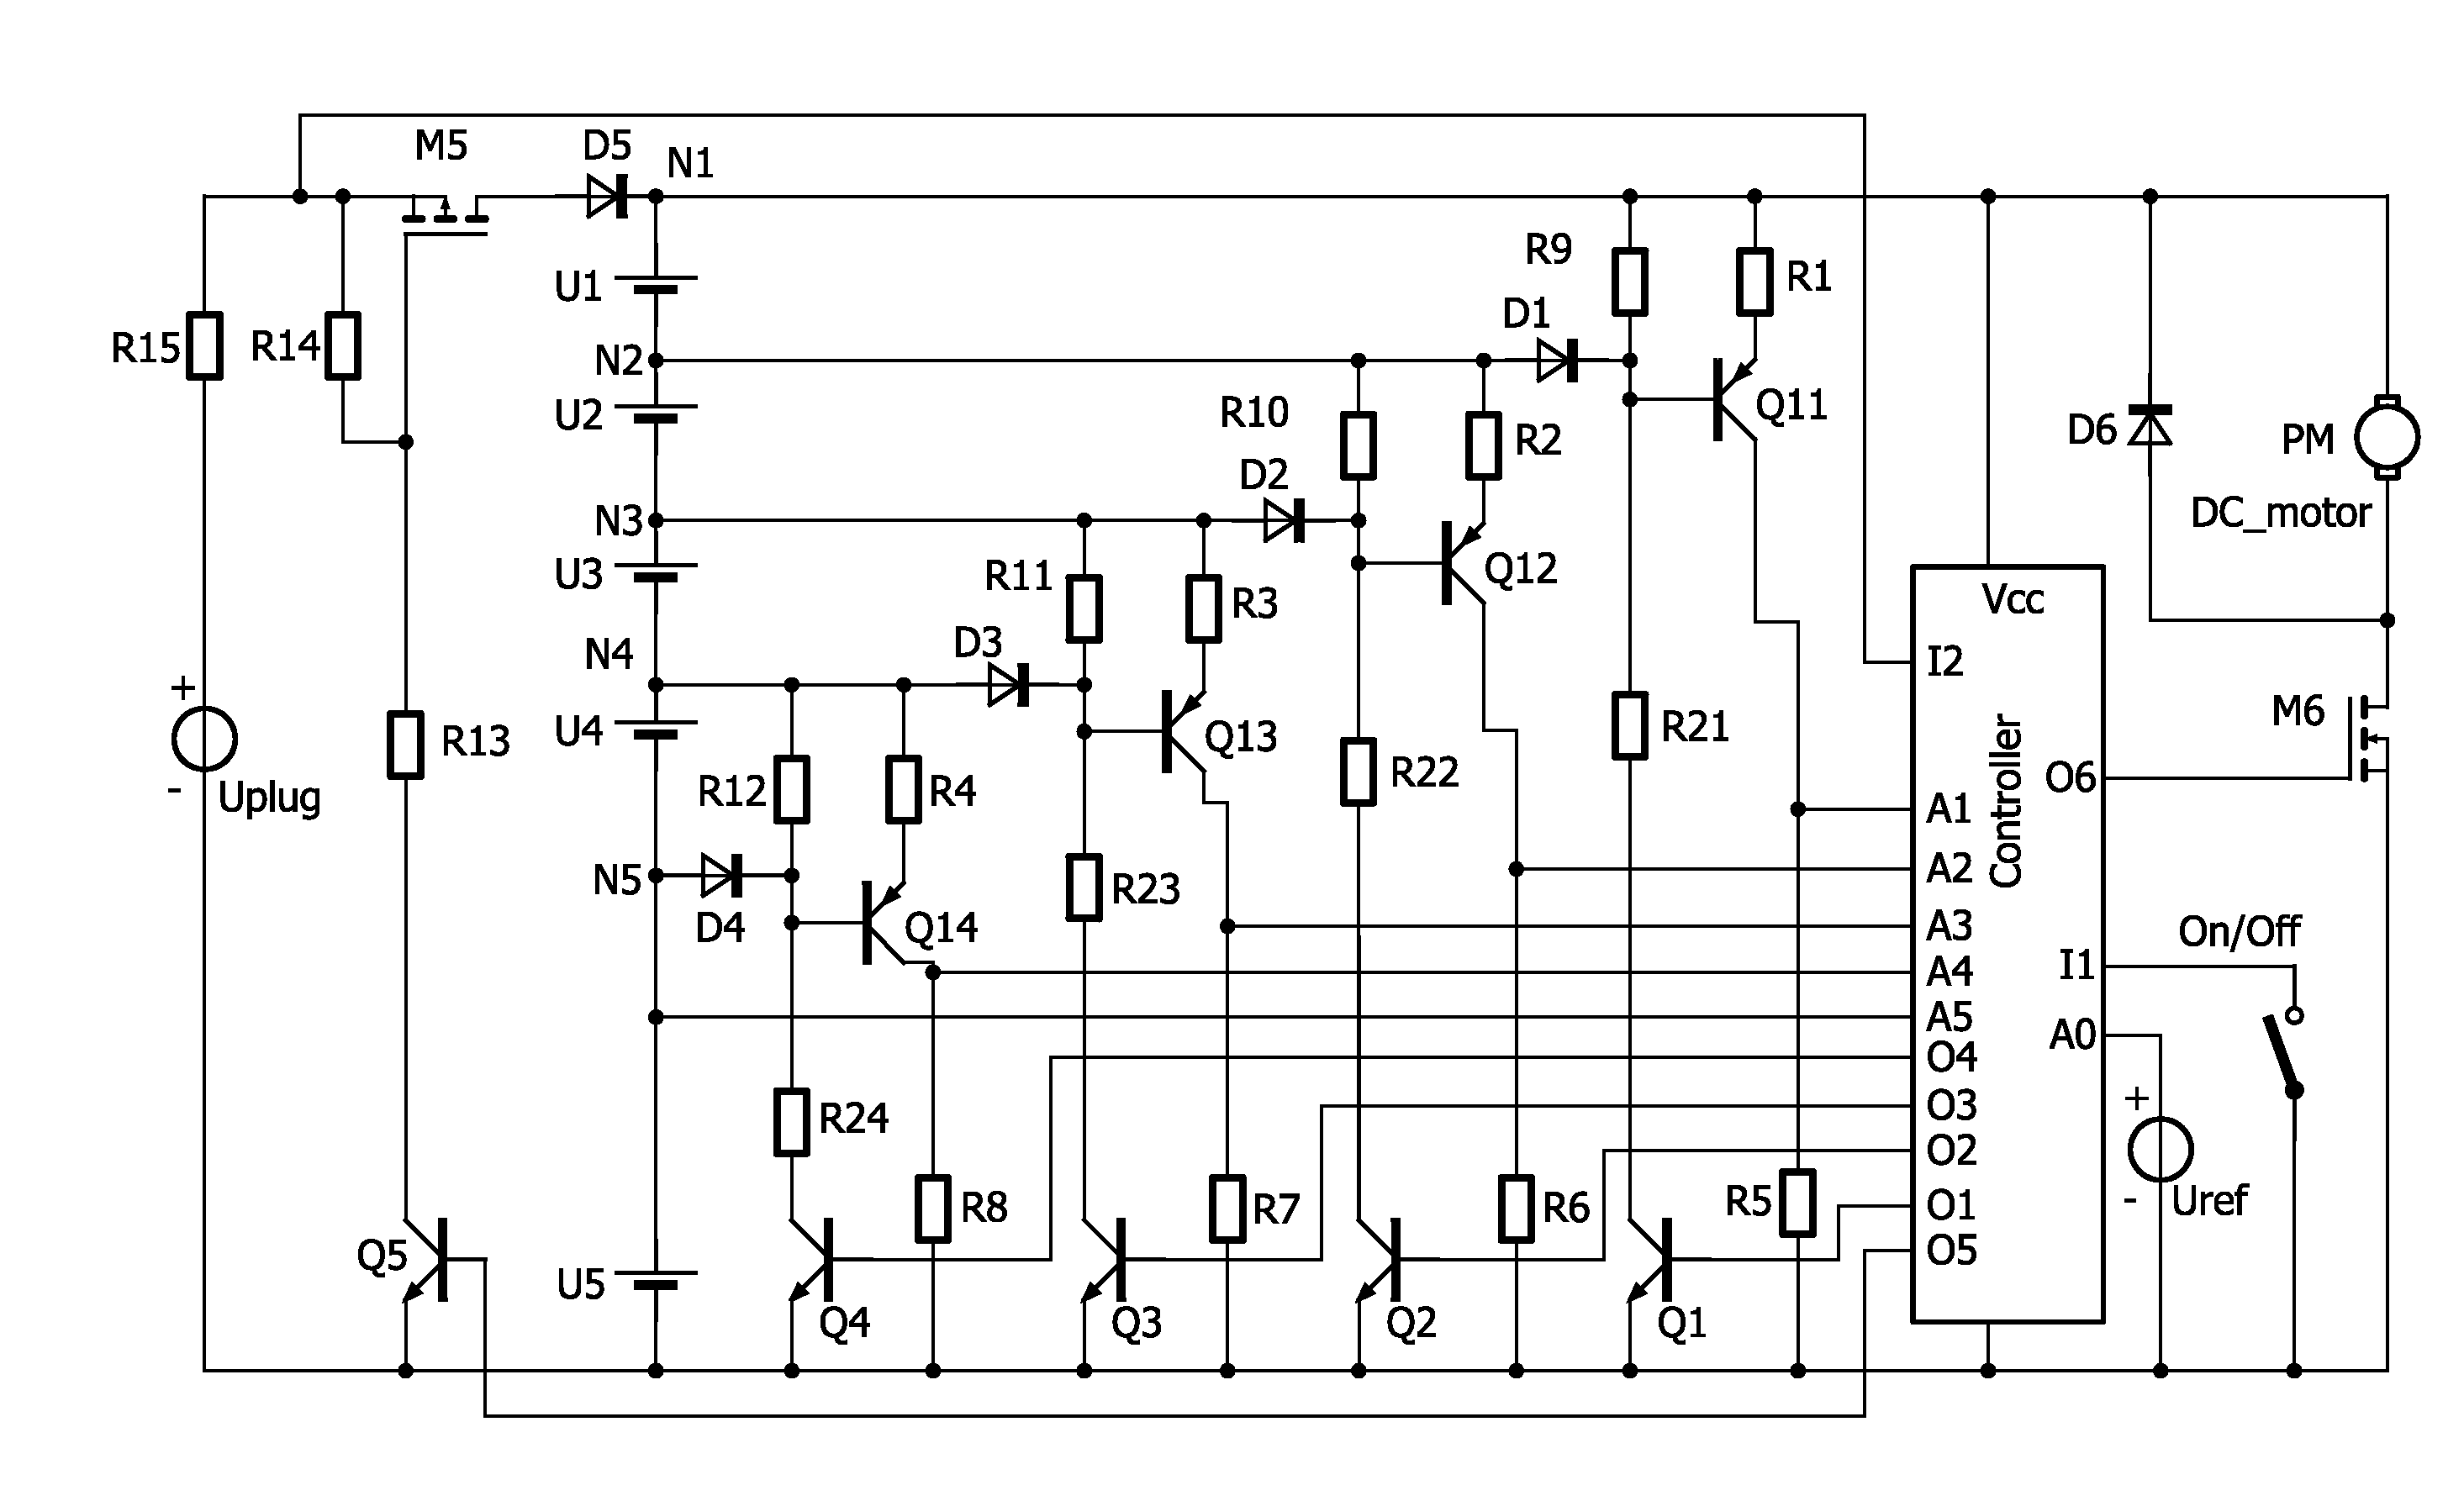 Battery voltage monitoring system for monitoring the battery voltage of a series arrangement of more than two batteries